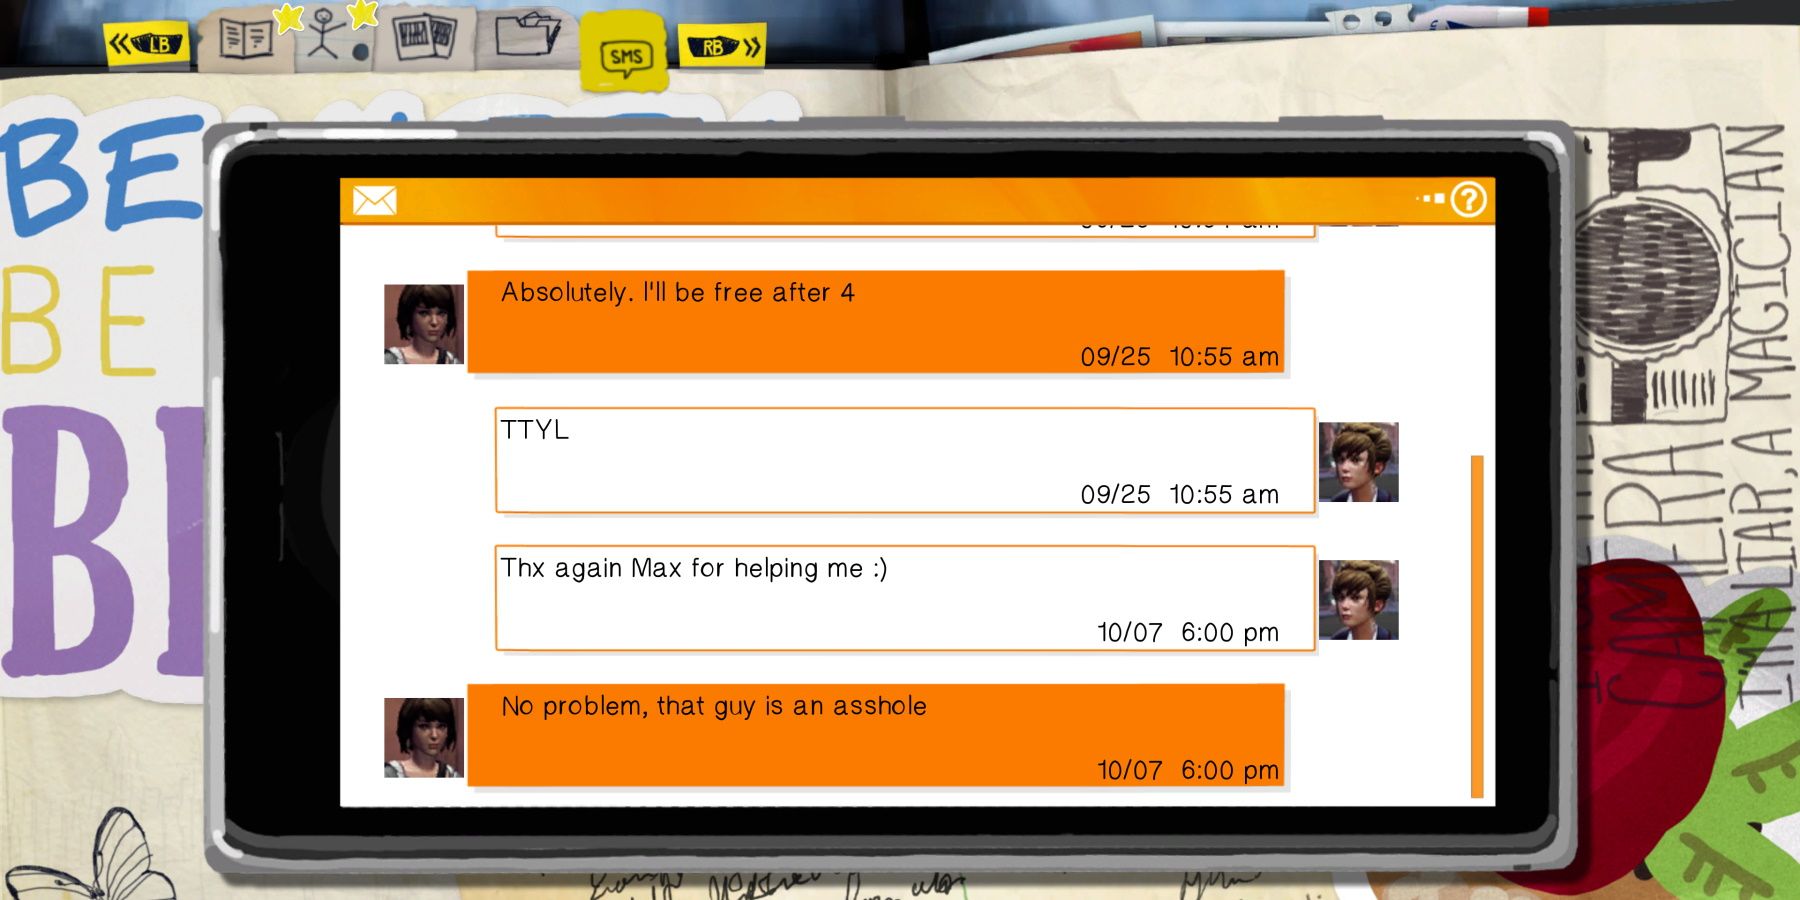 Text messages between Max and Kate during Episode 1 of Life is Strange